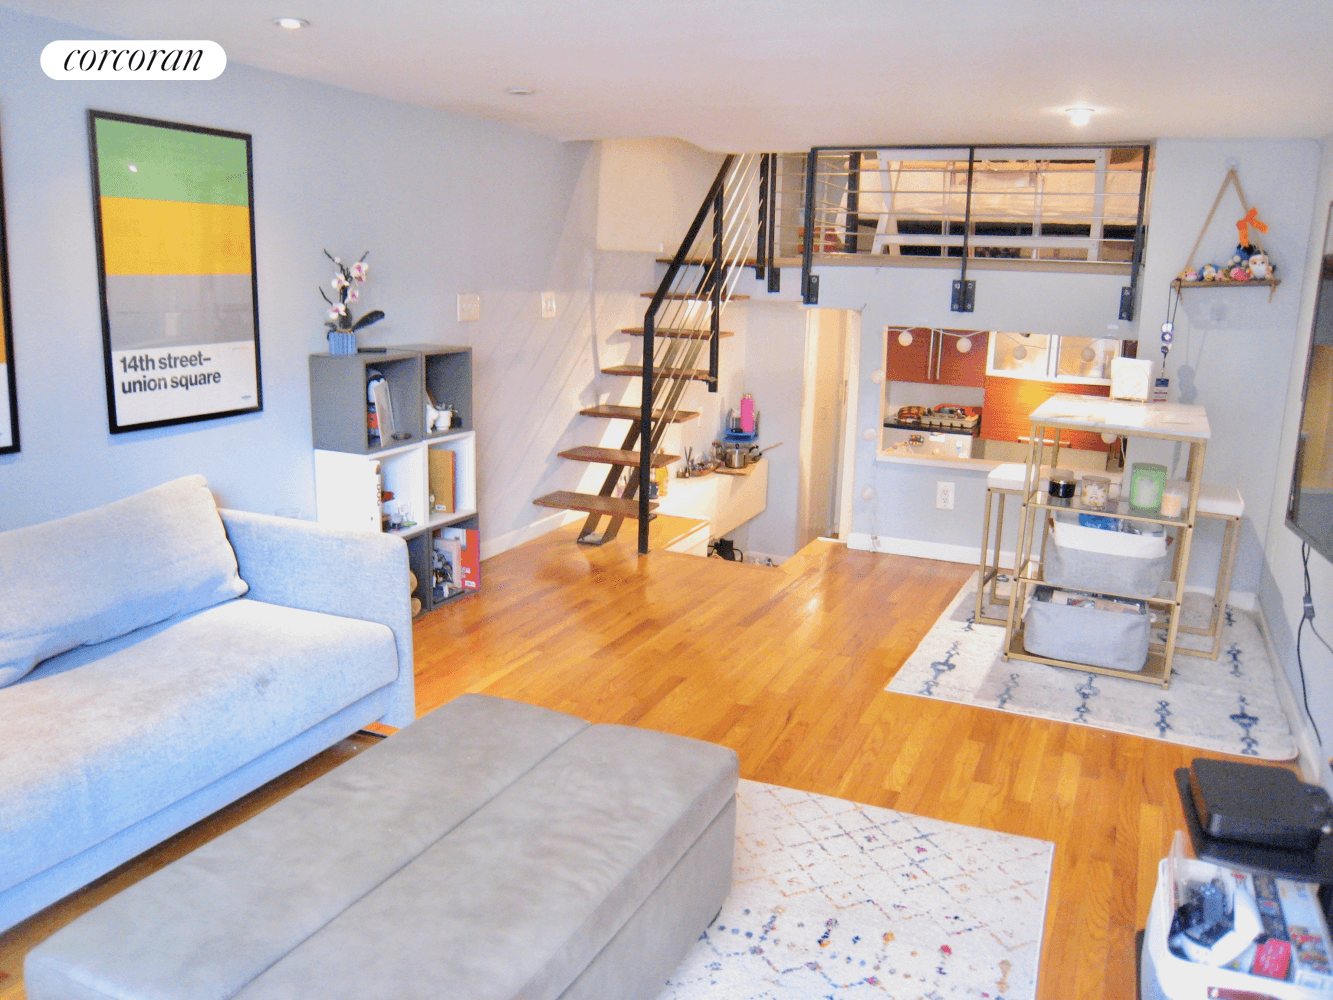 Spacious multi level home located in the heart of Greenwich Village and one block from Soho.